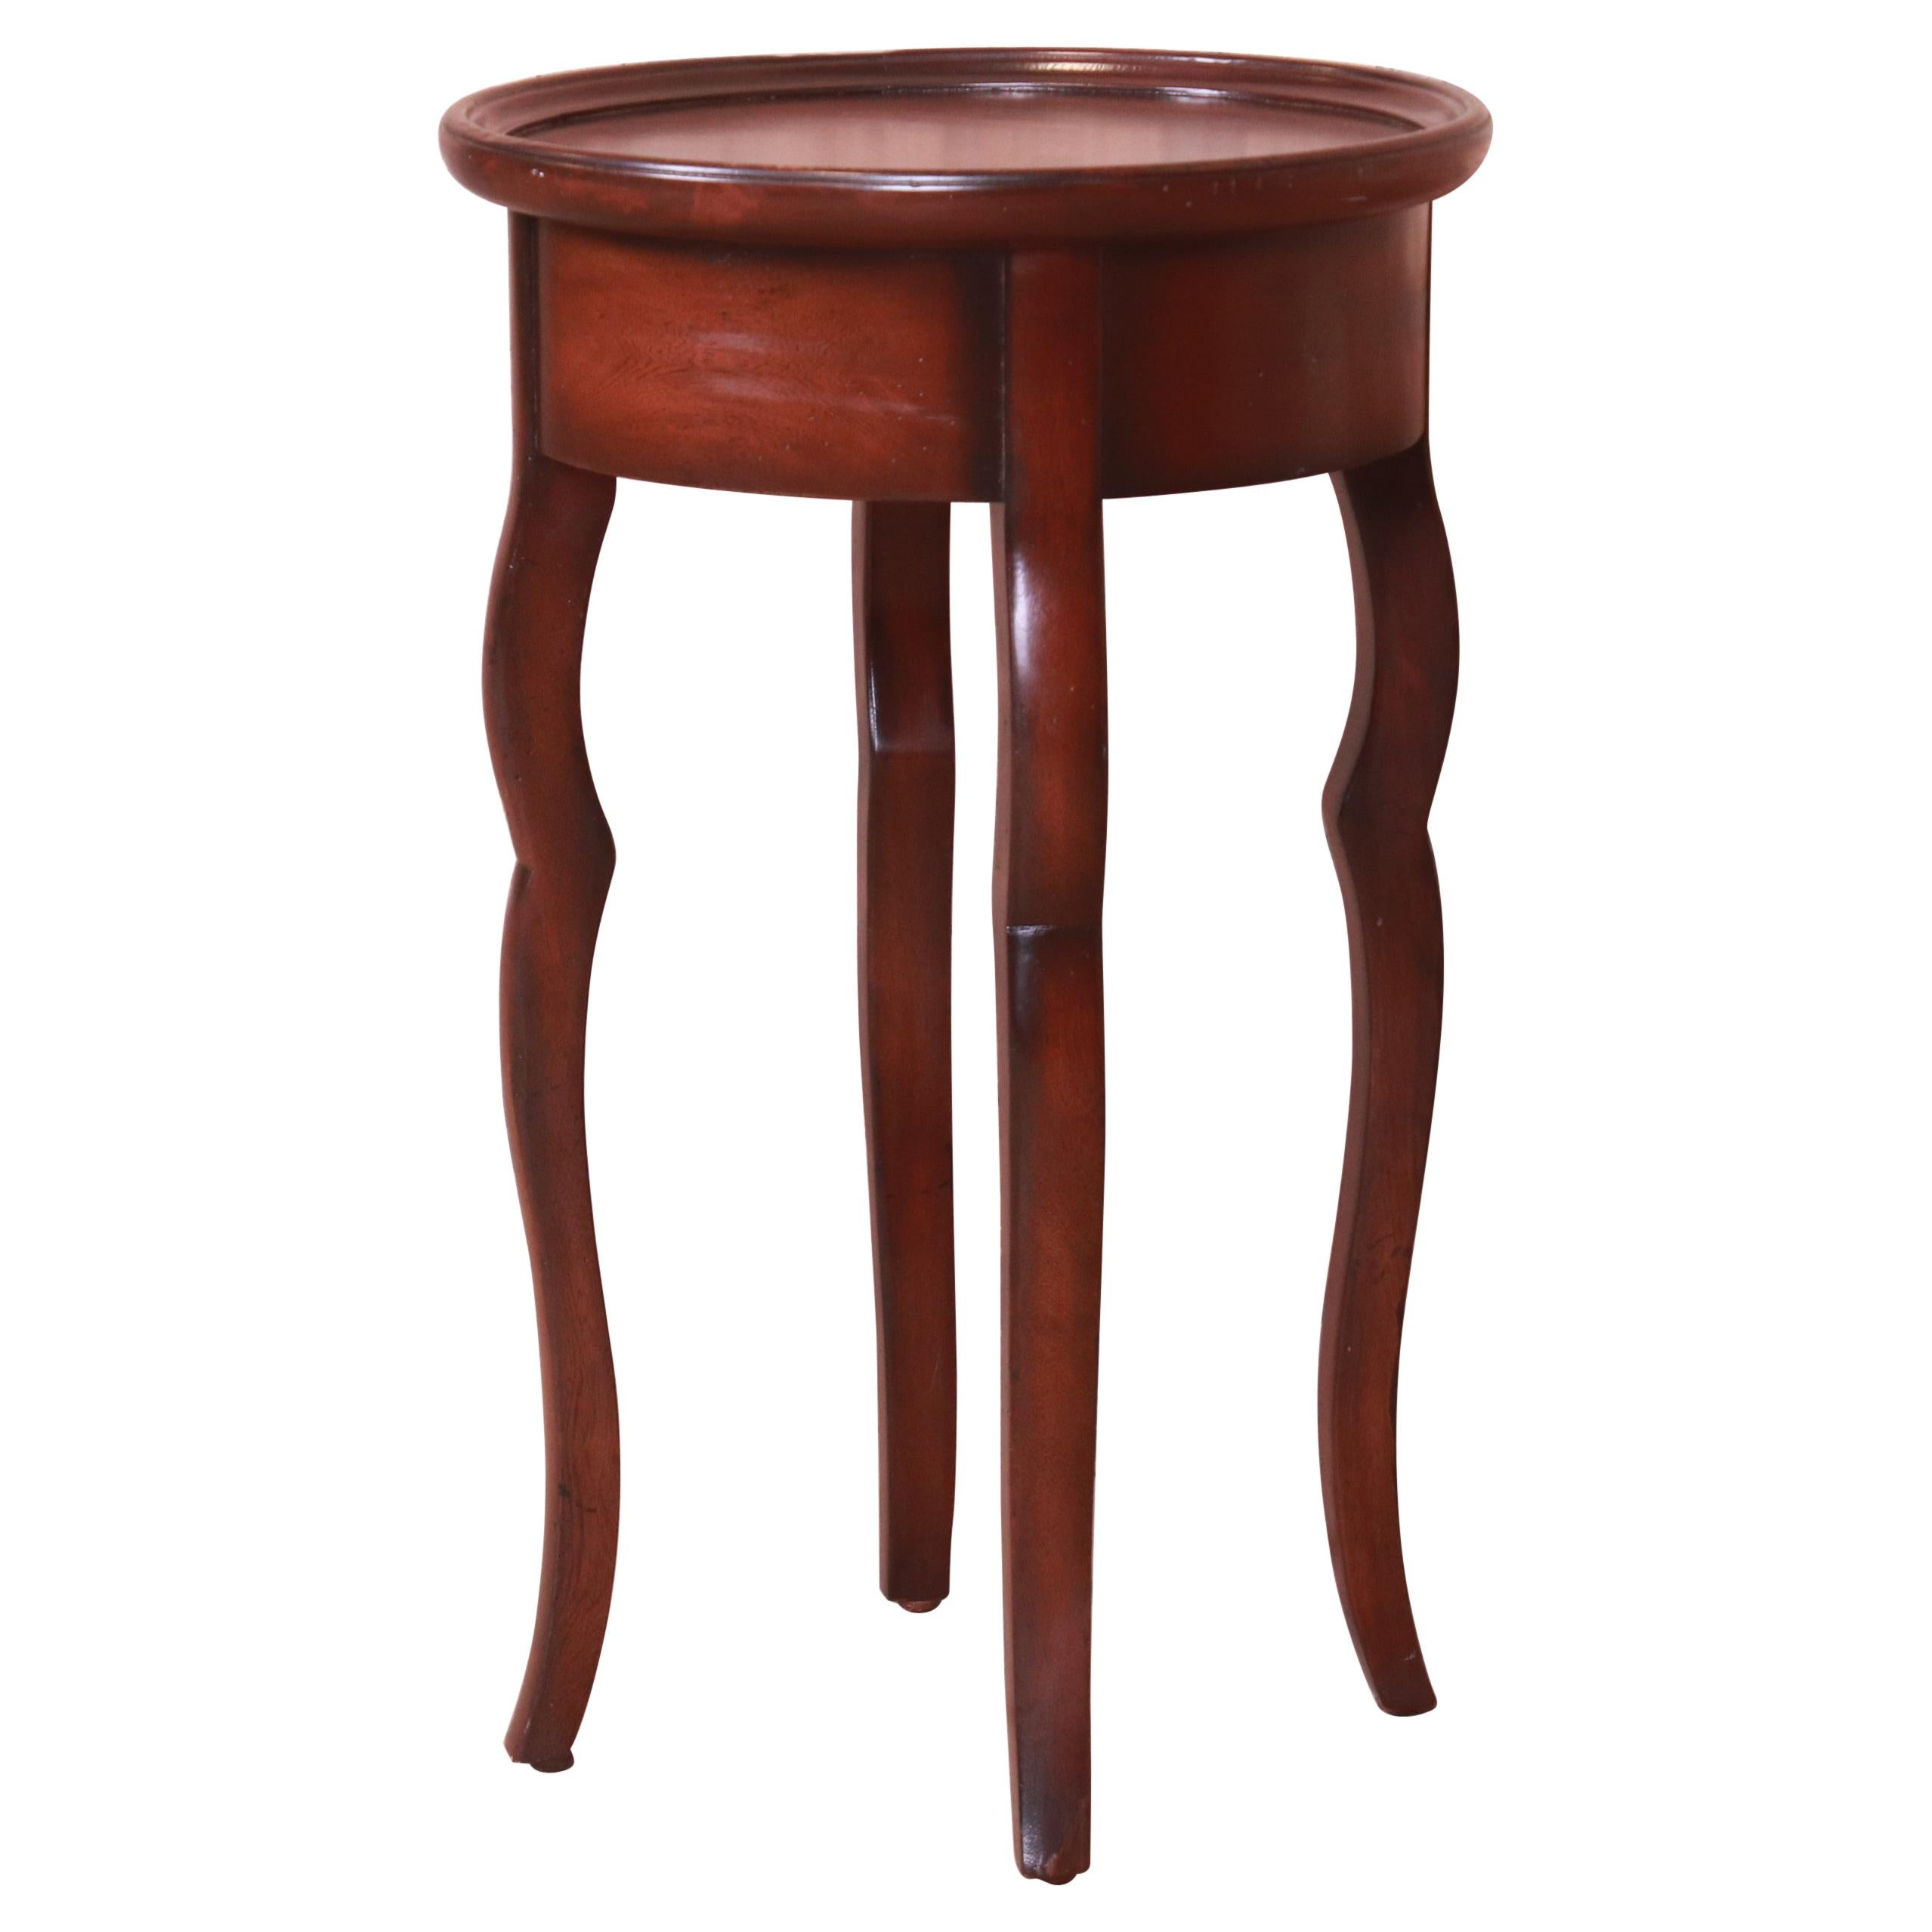 Baker Furniture Milling Road French Provincial Mahogany Side Table